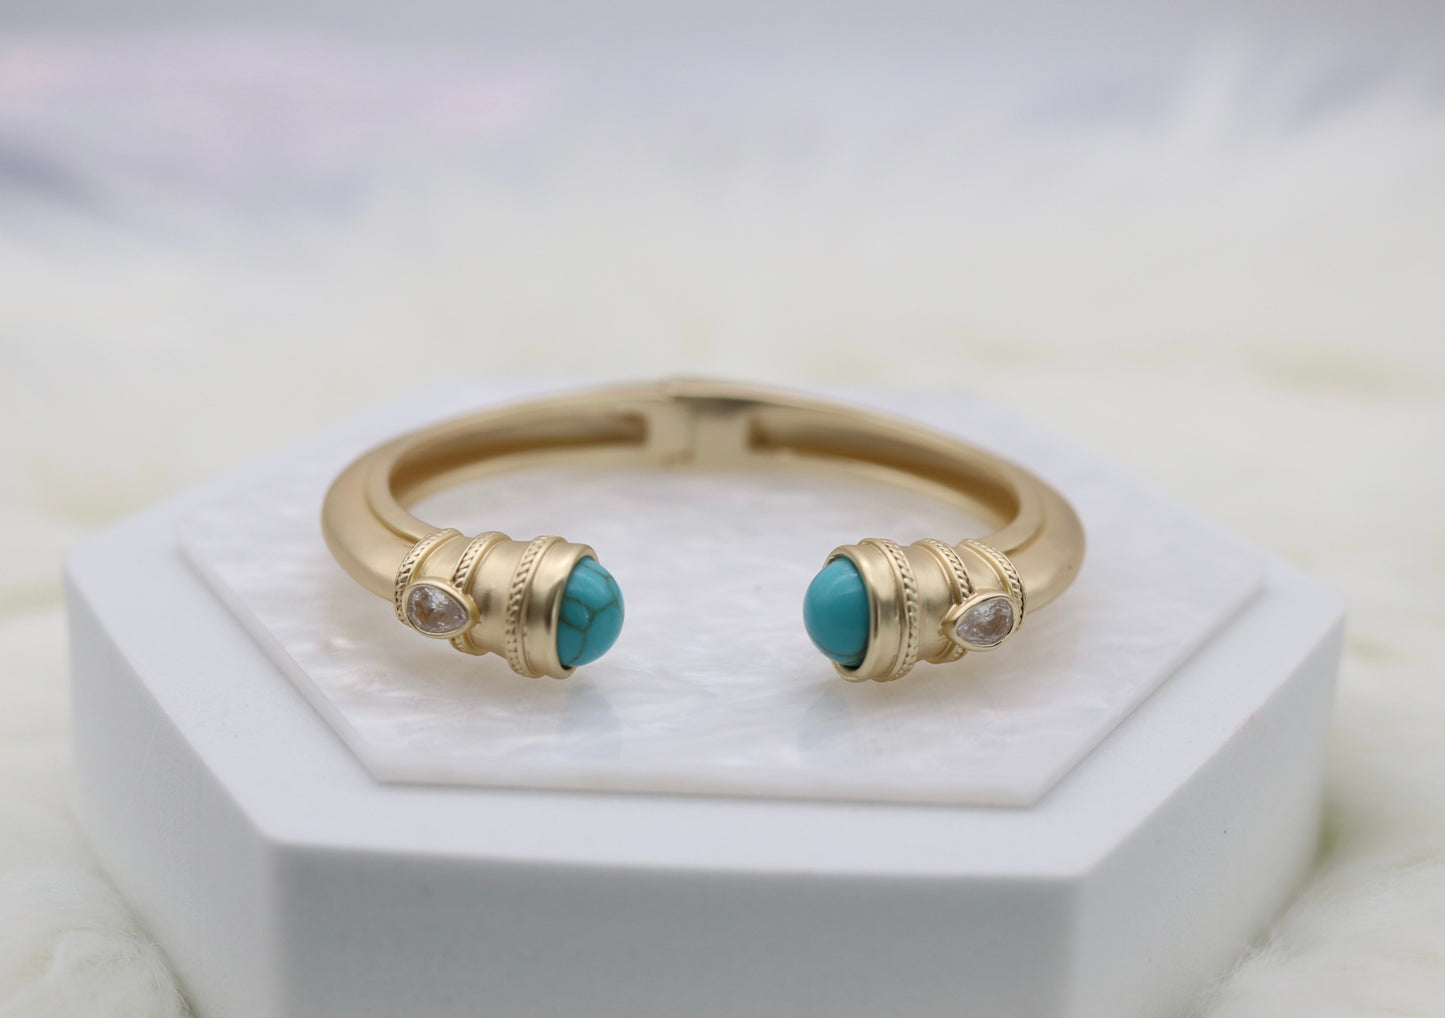 Matte Gold Cuff Bracelet with Turquoise Ends